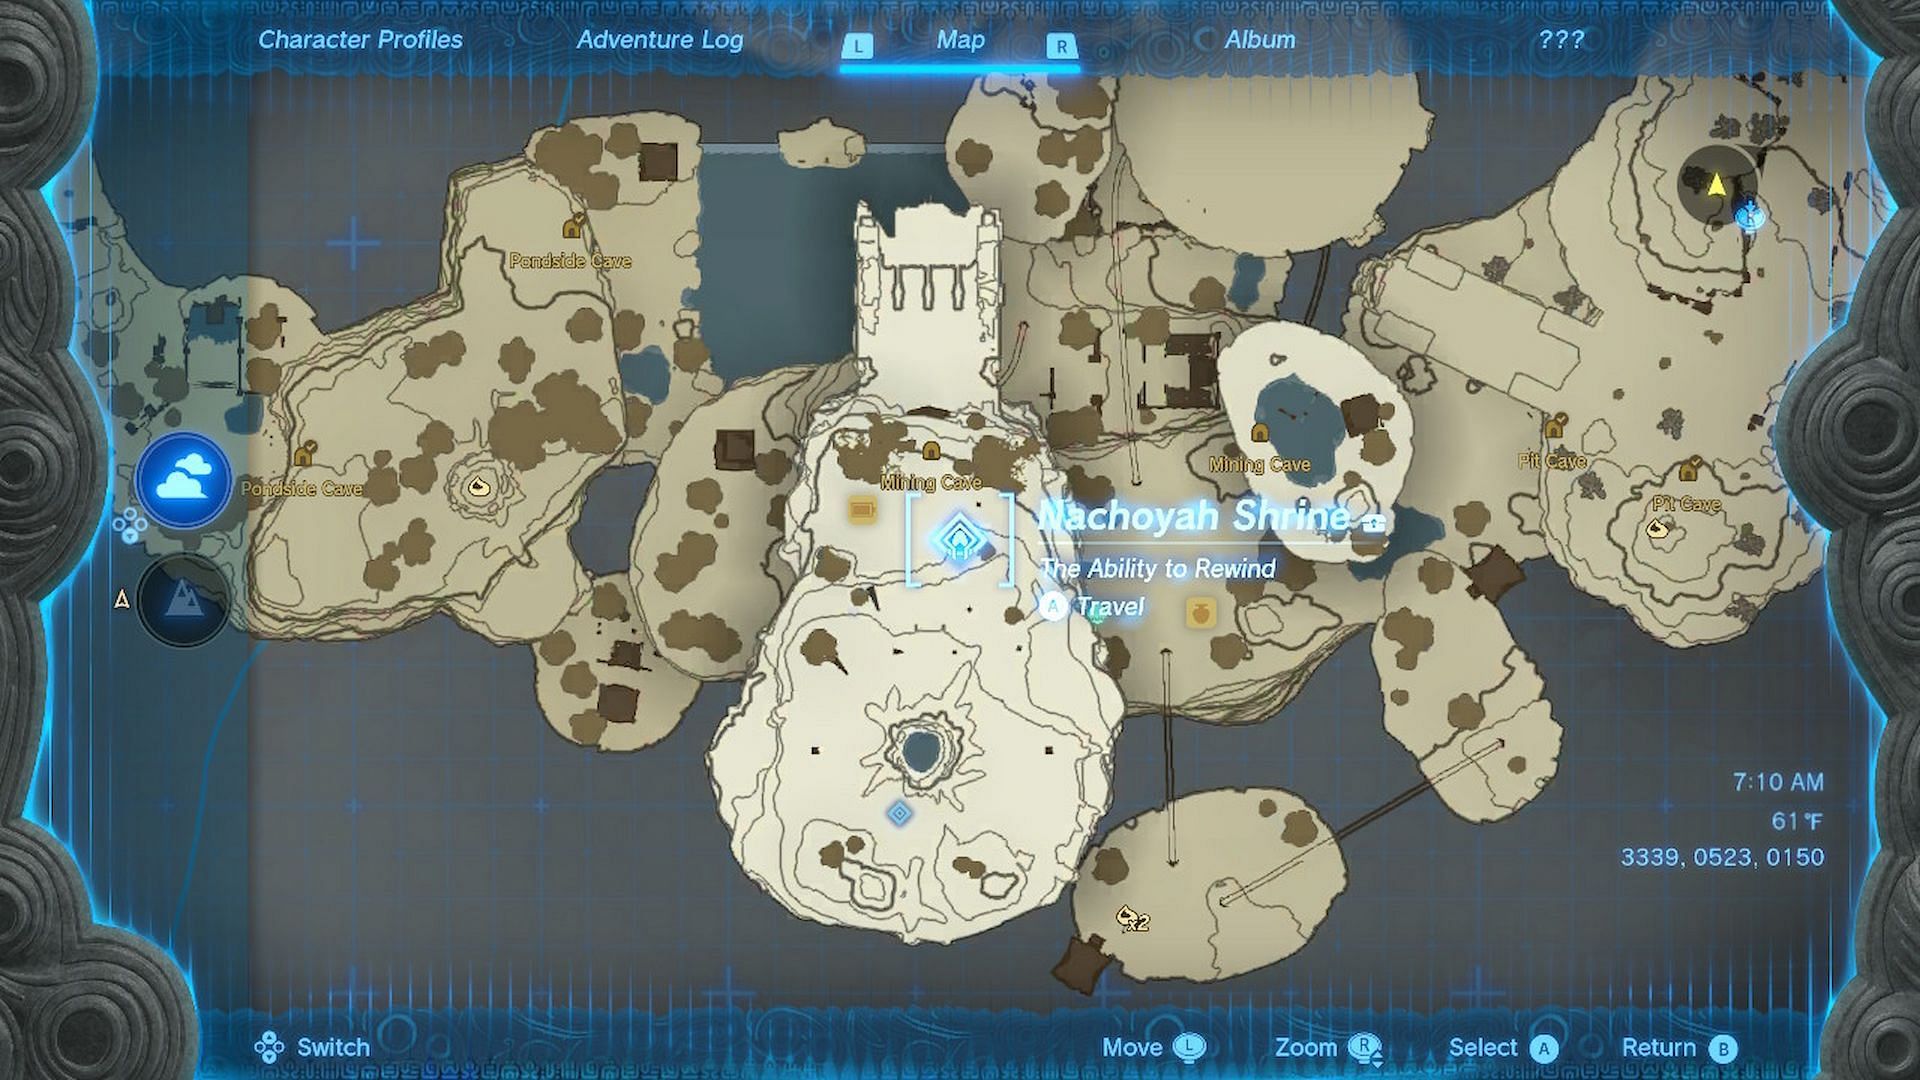 The Nachoyah Shrine in the in-game map of Tears of The Kingdom (Image via Nintendo)